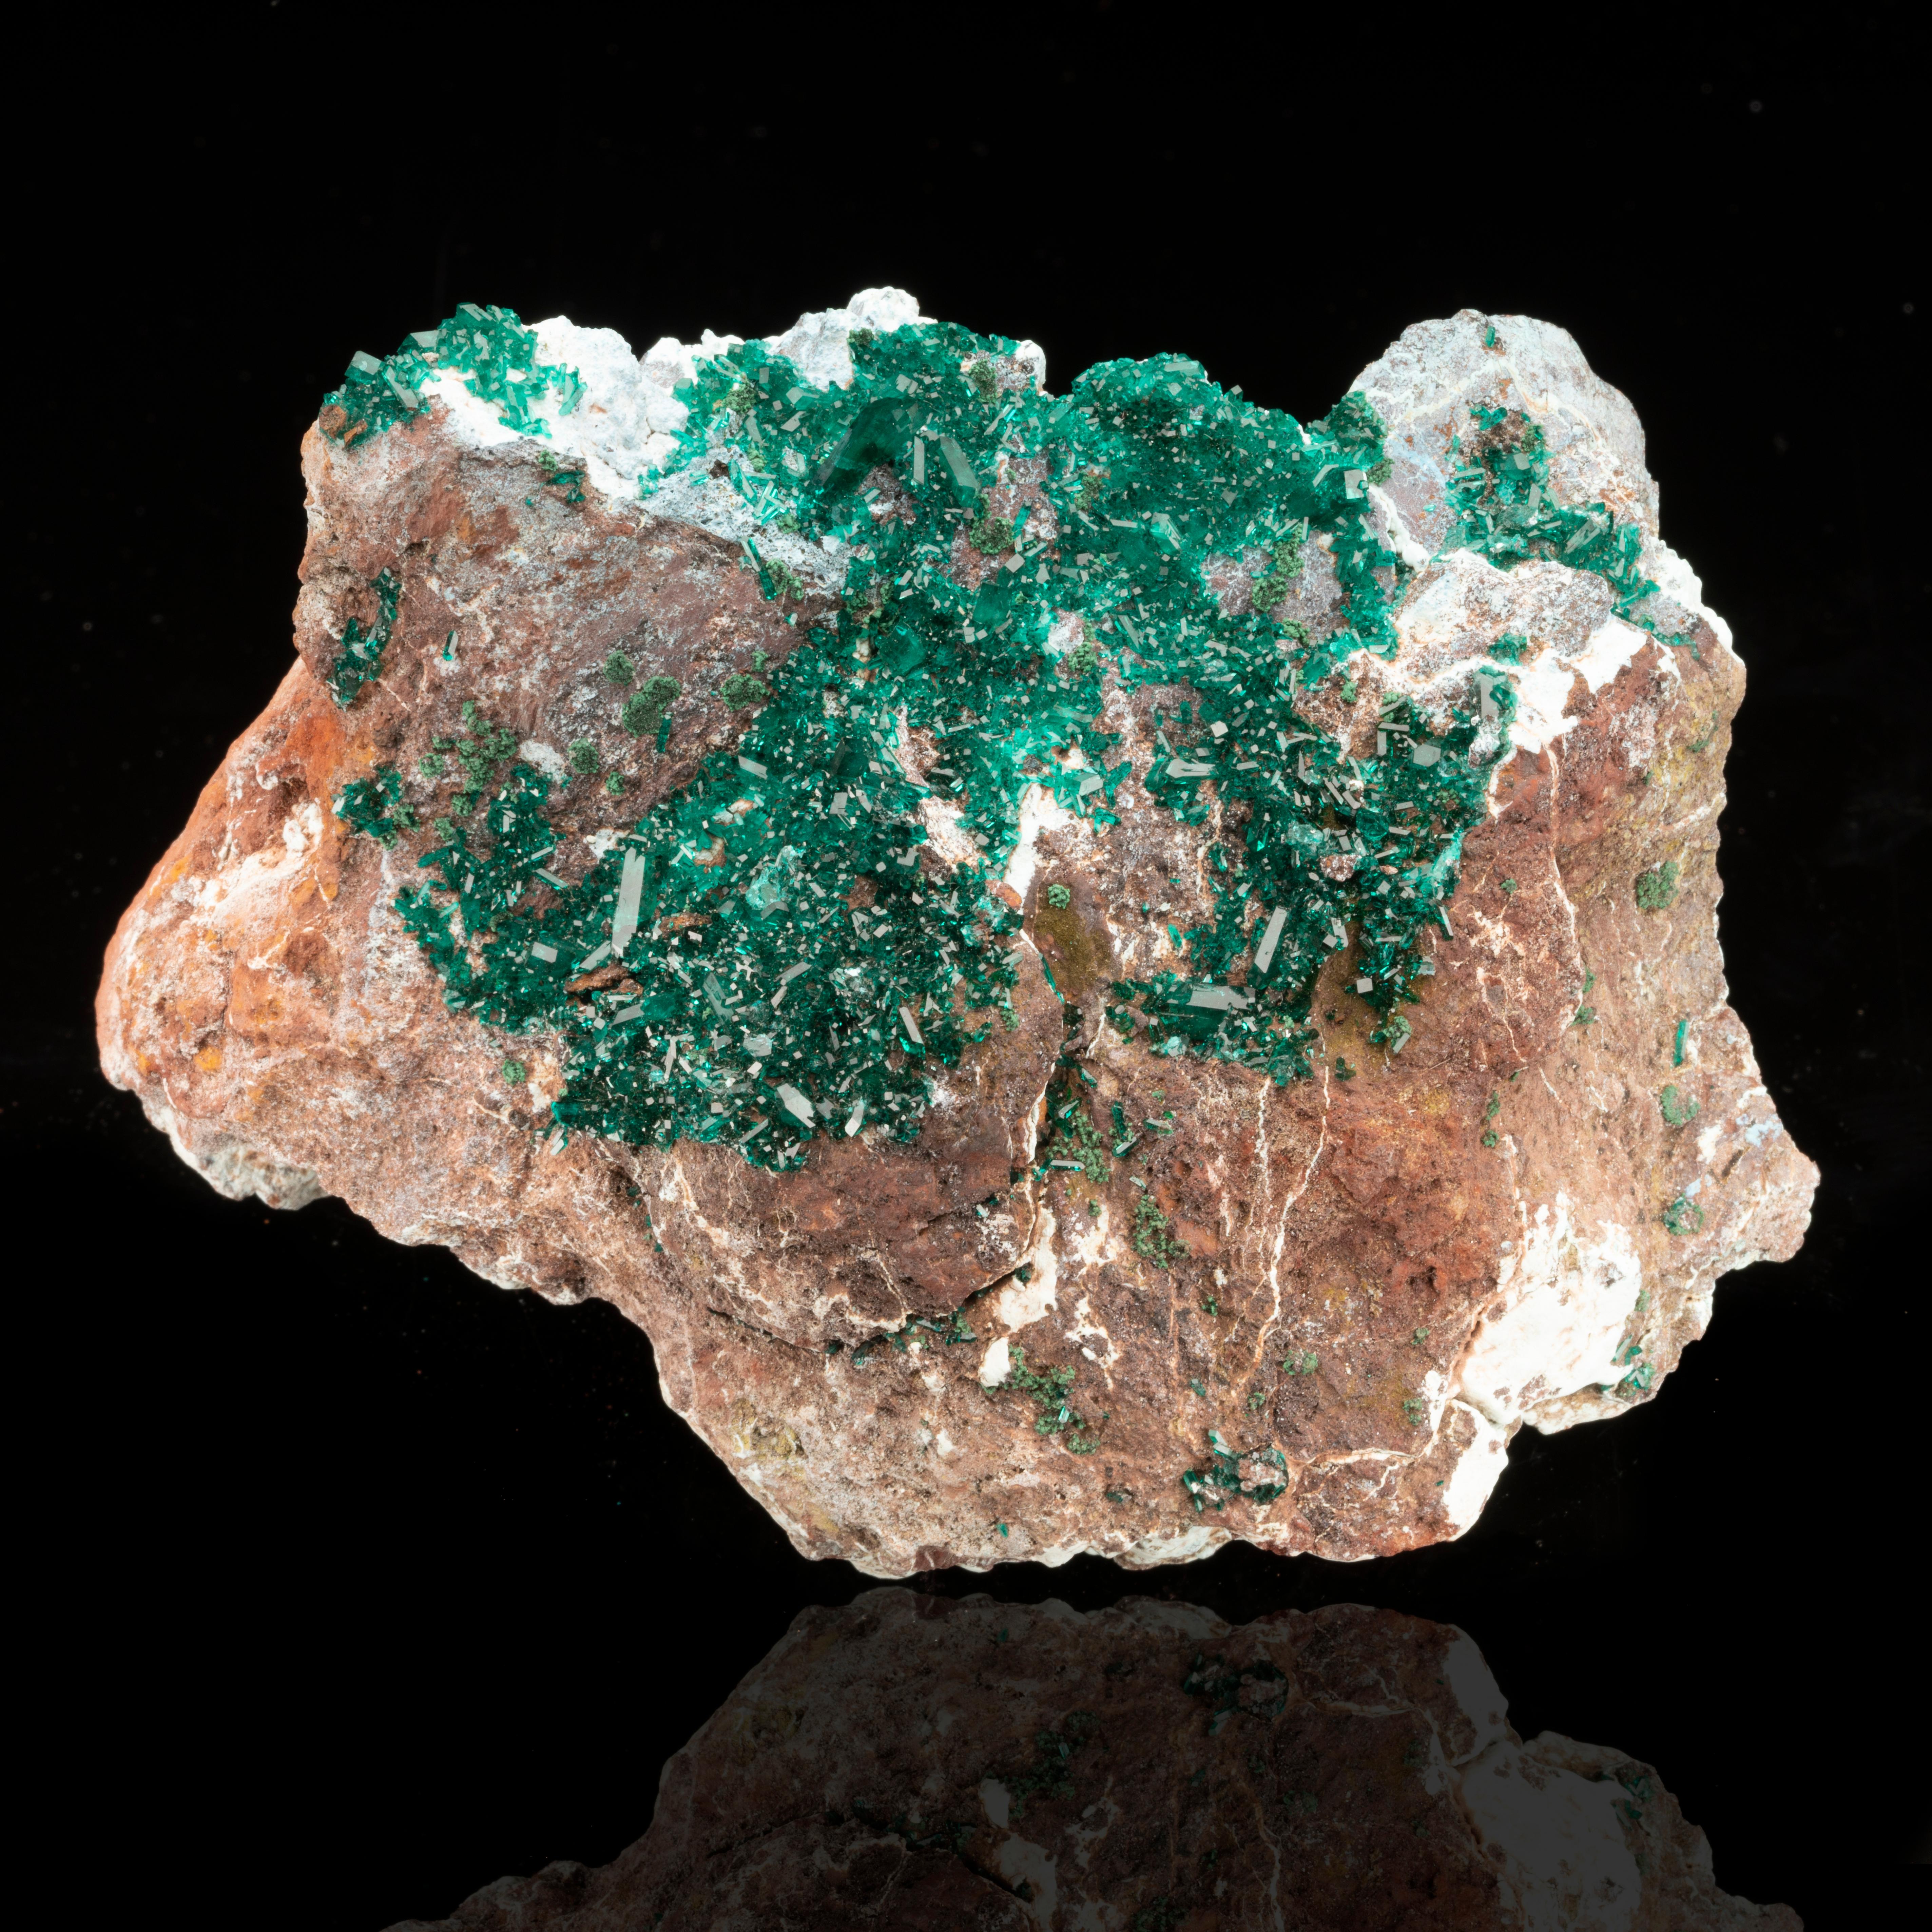 This specimen boasts a glistening coating of beautifully gemmy, emerald green dioptase crystals on matrix. The name “dioptase” comes from Greek and references the visibility of the twin cleavage plains within the startlingly translucent crystals of